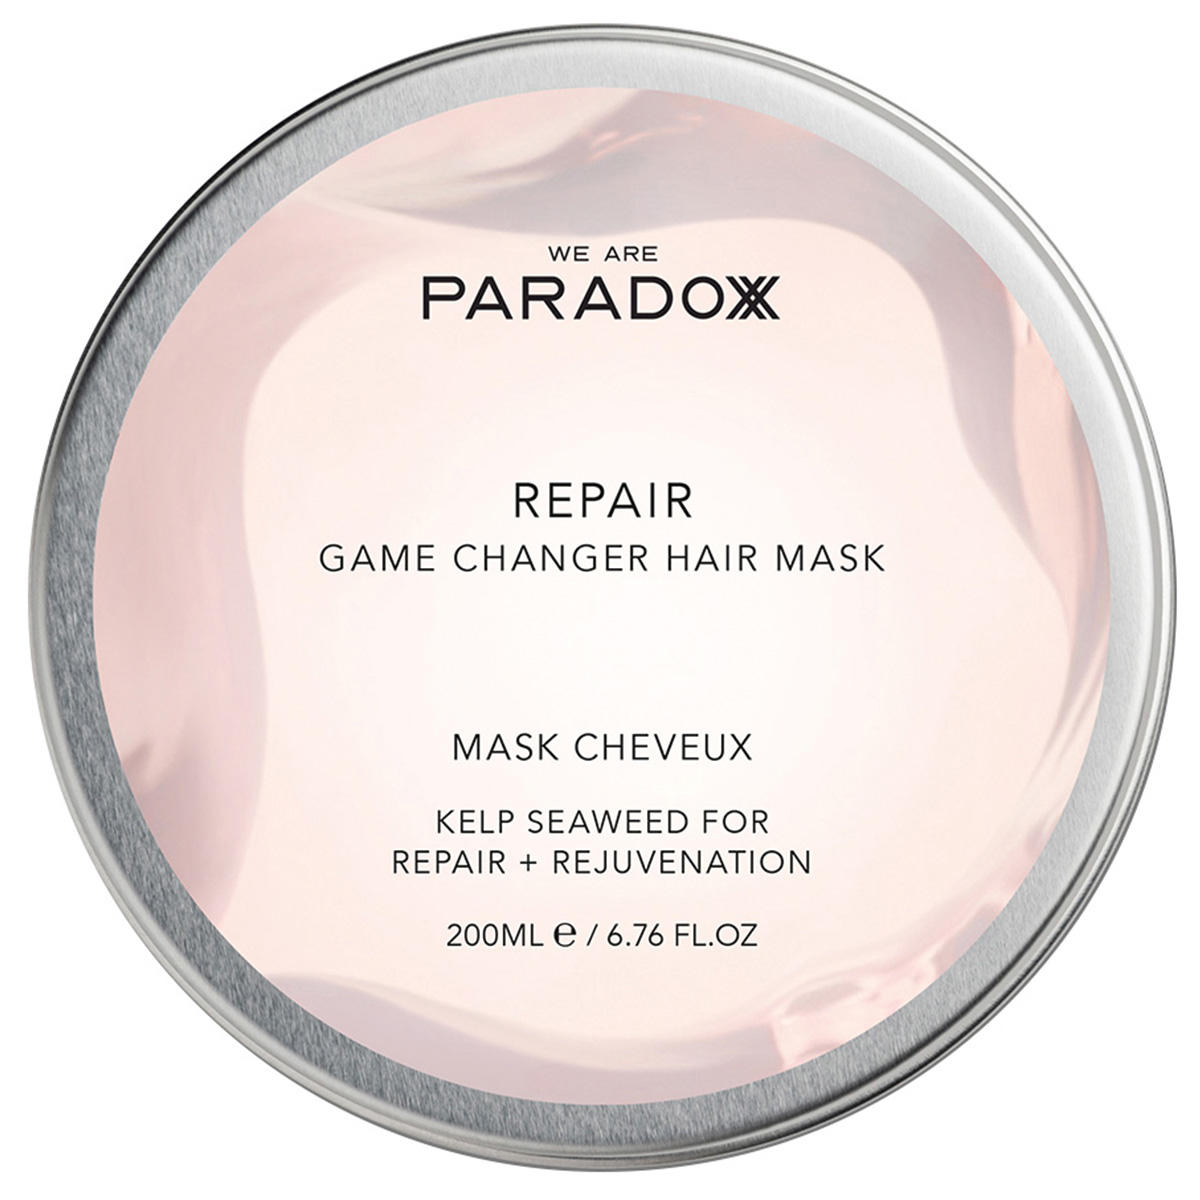 WE ARE PARADOXX REPAIR GAME CHANGER HAIR MASK 200 ml - 1